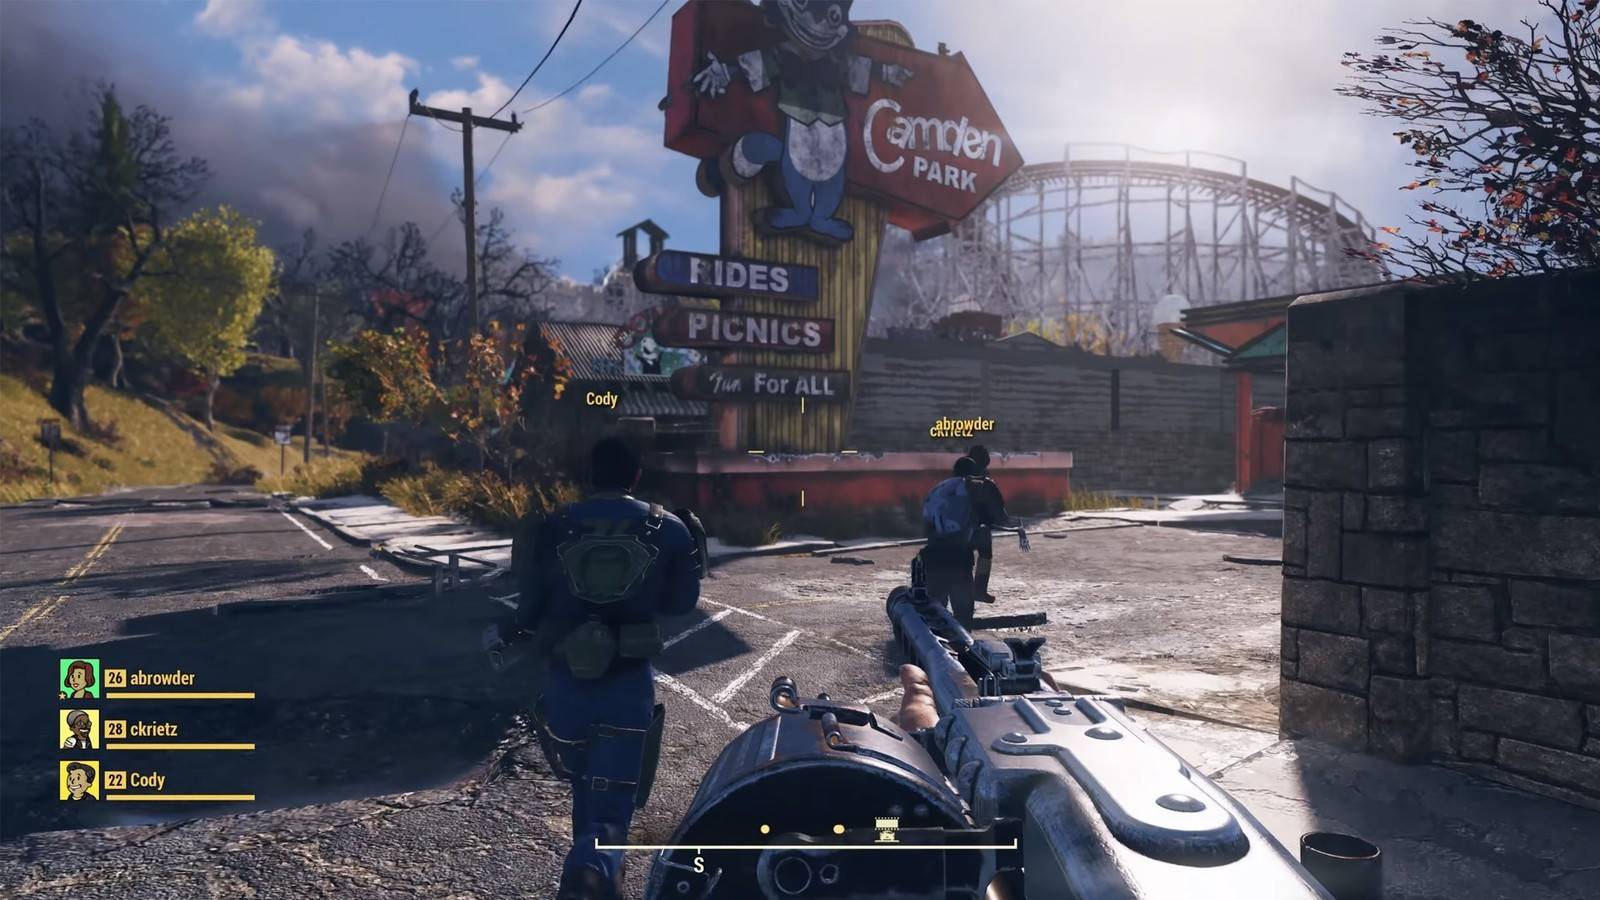 where do you buy fallout 76 on pc